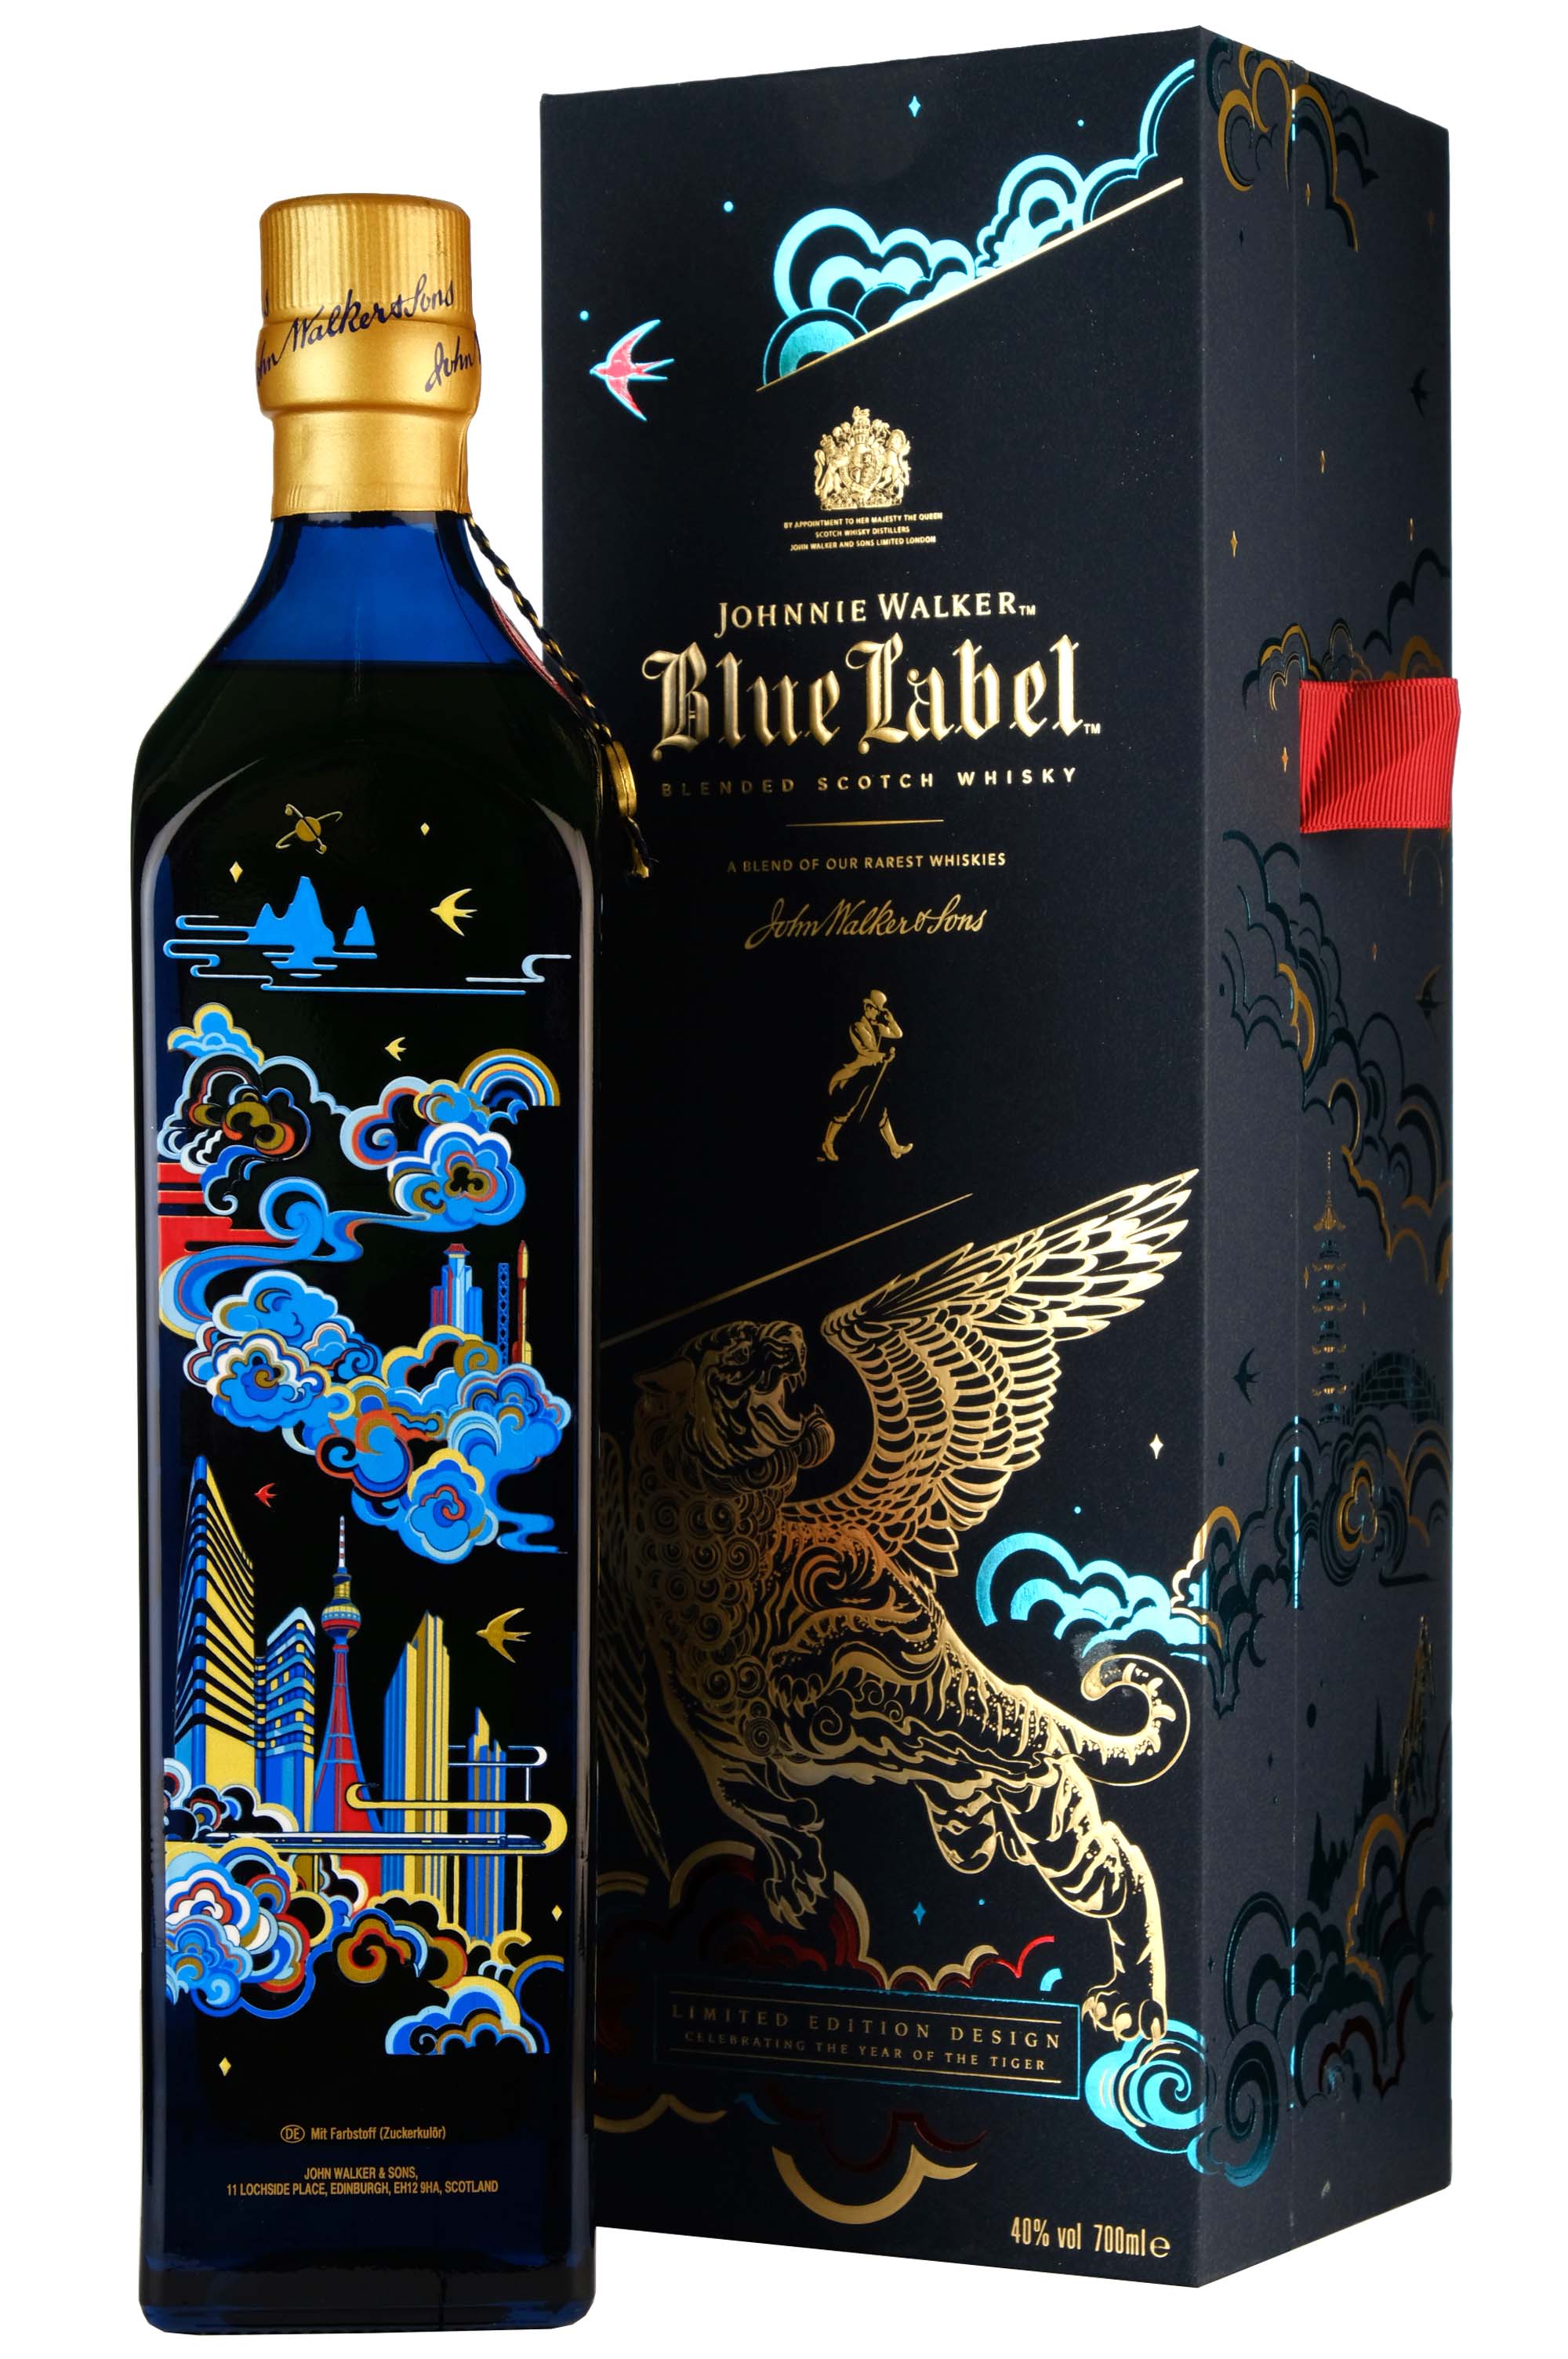 Johnnie Walker Blue Label | Chinese Year Of The Tiger